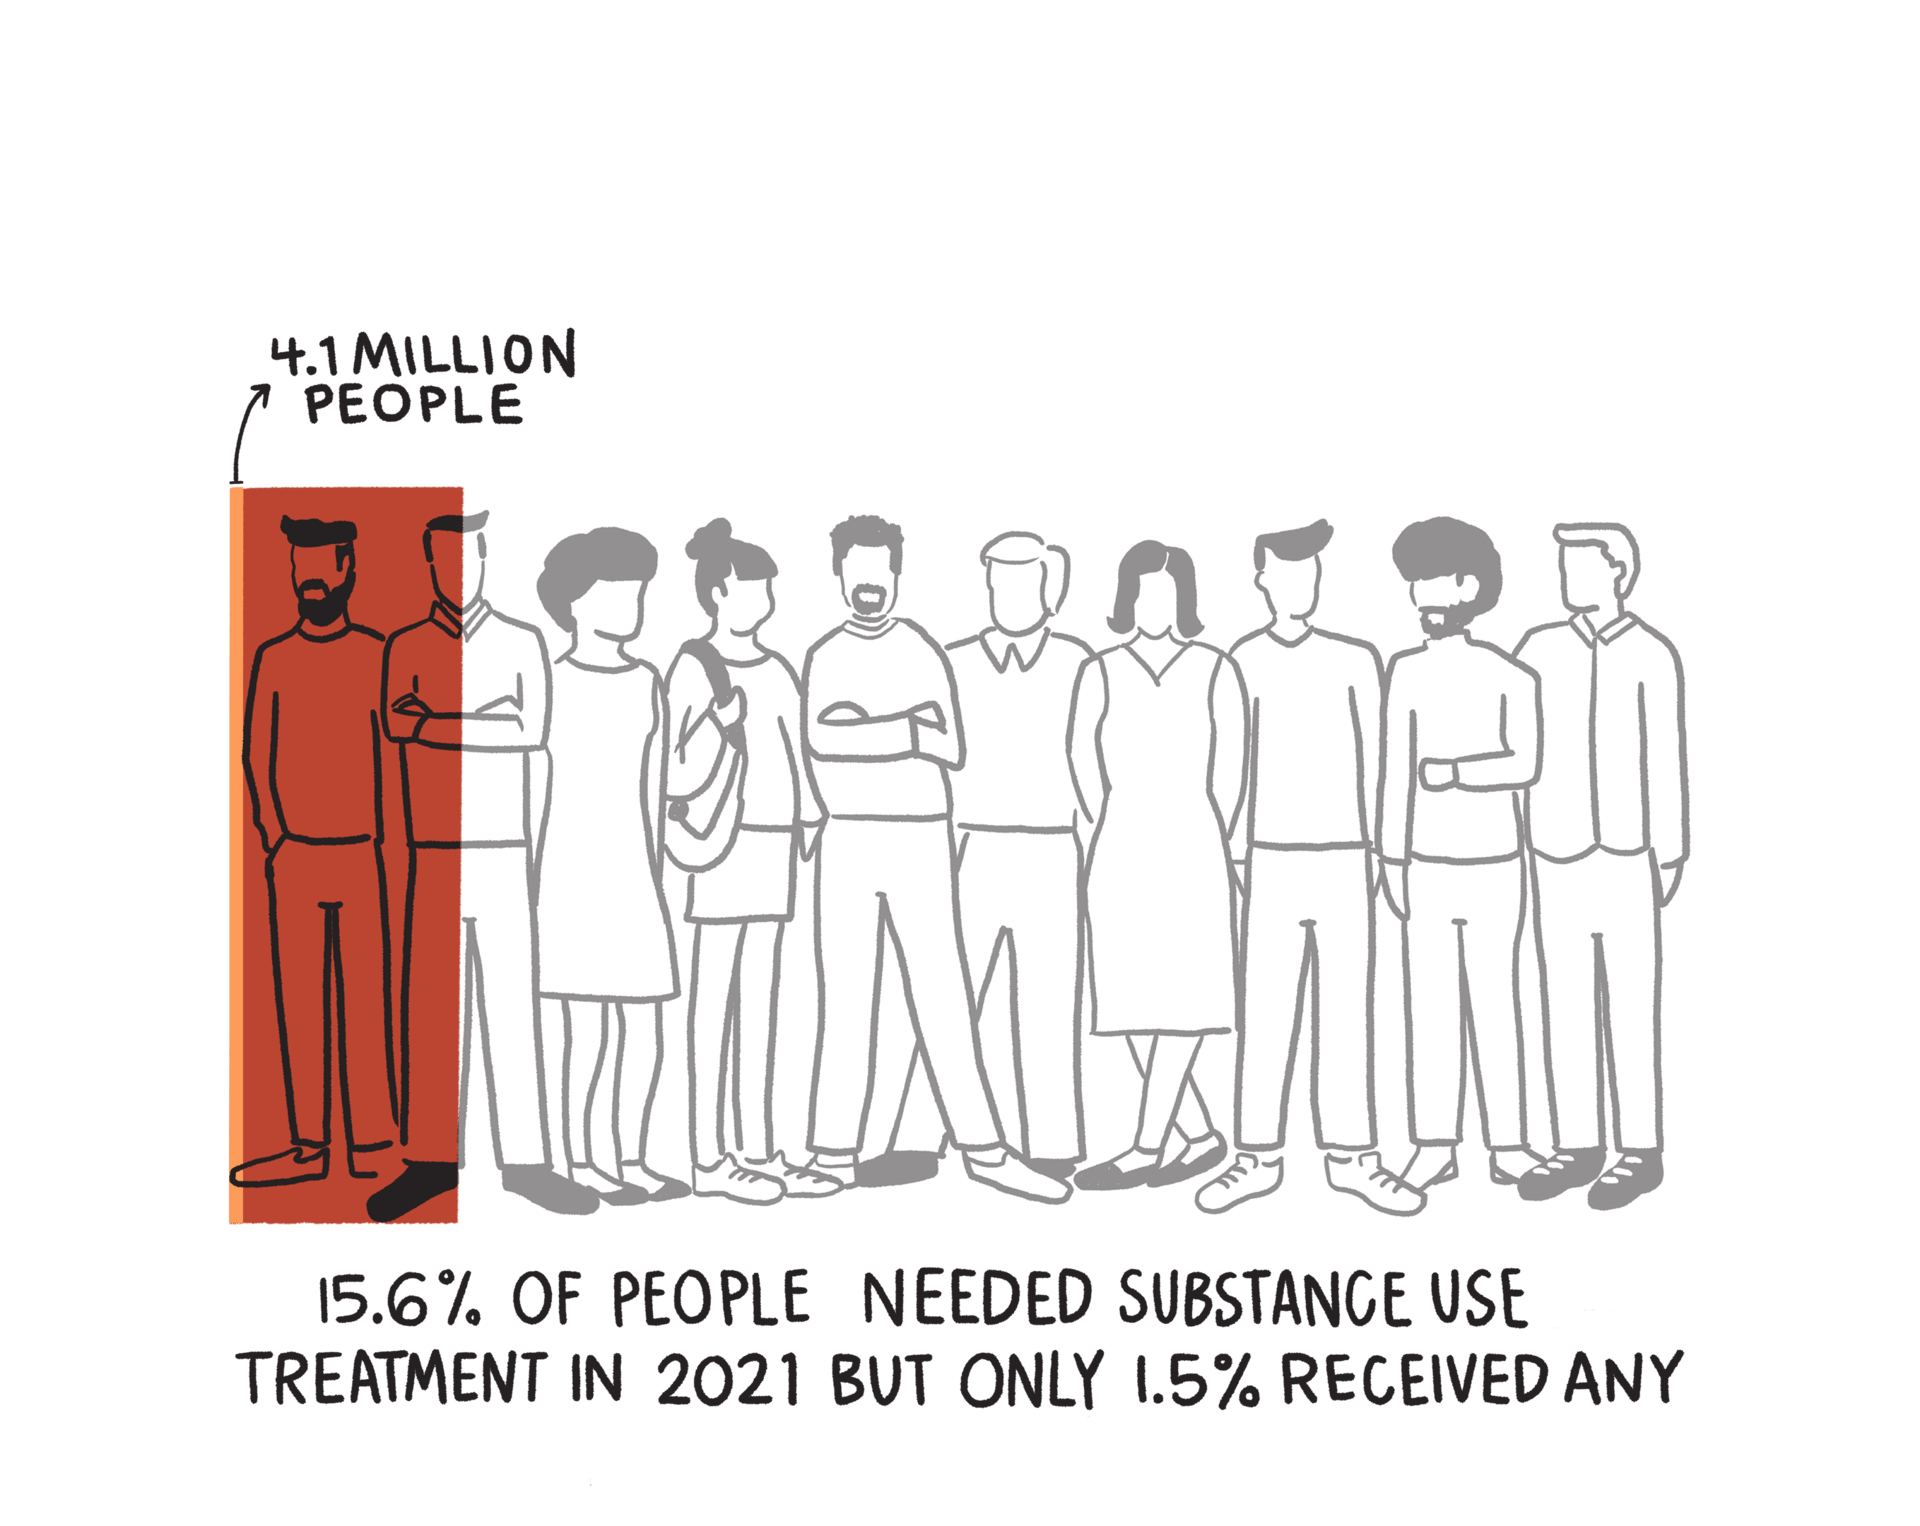 Bar char with silhouettes of ten people in the background. The caption reads 15.6% of people needed substance use treatment in 2021 but only 1.5% received any. 1.5% is equal to 4.1 million people.